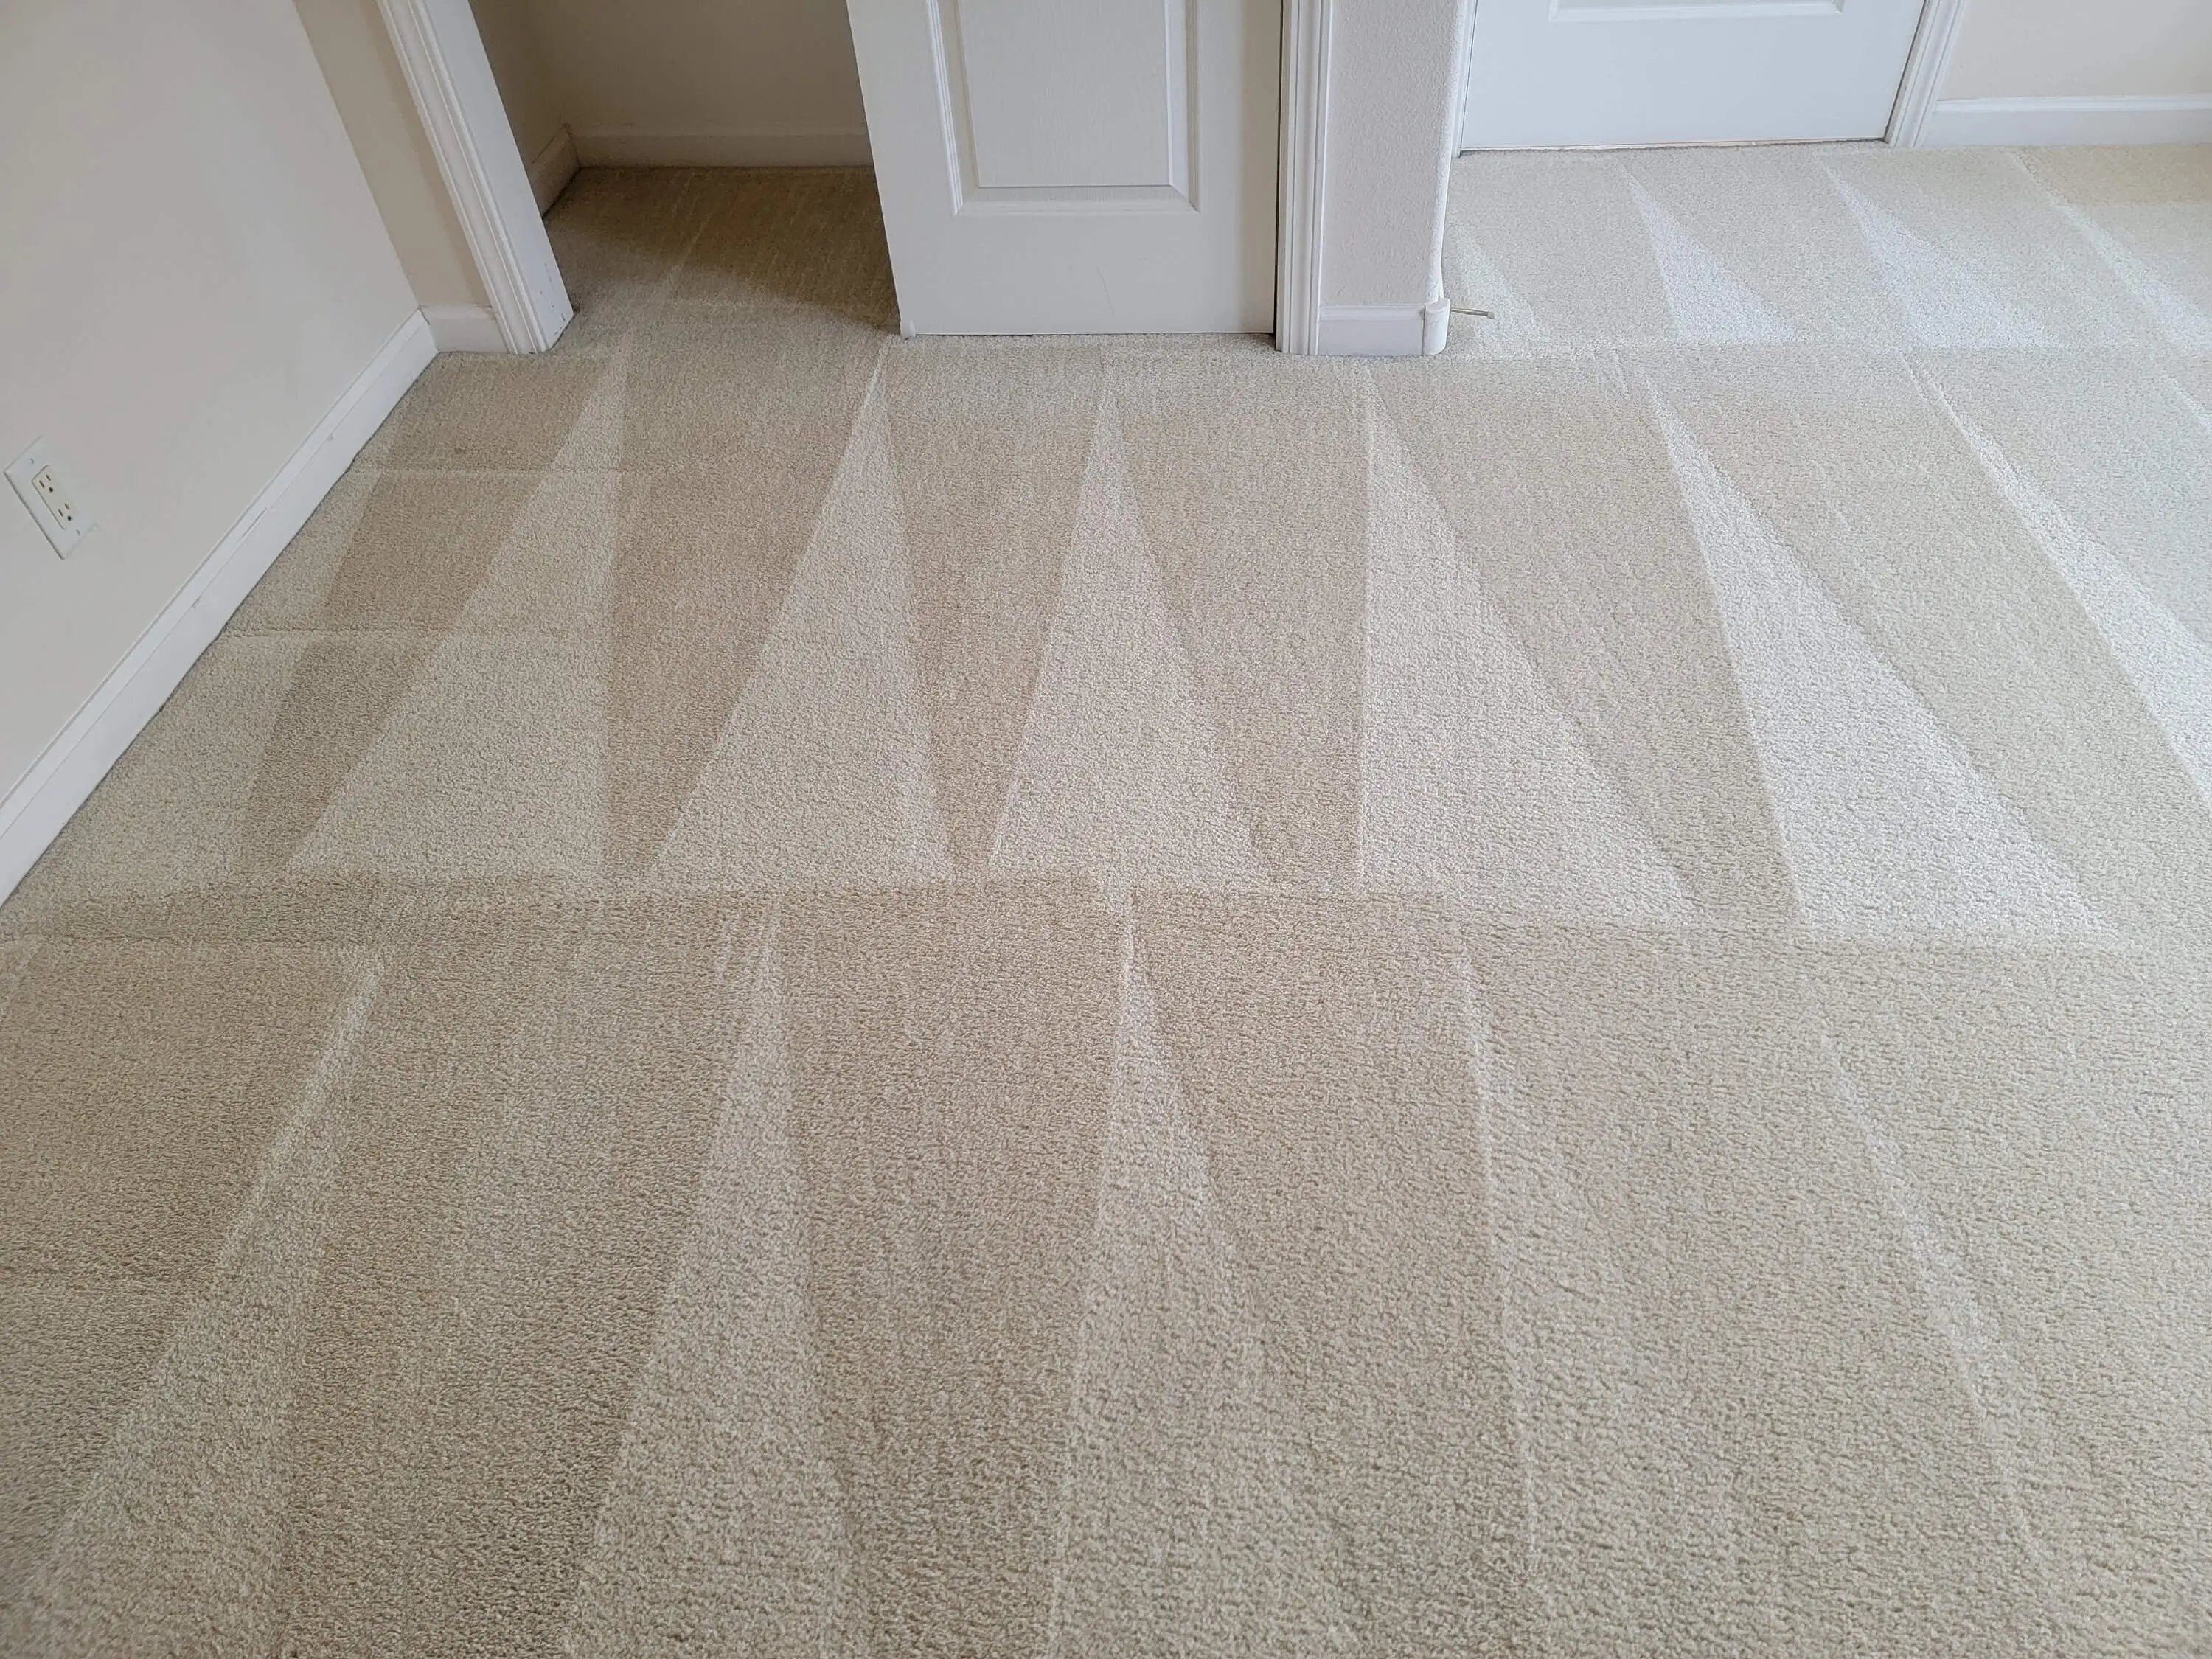 image of a carpet that has been professionally cleaned